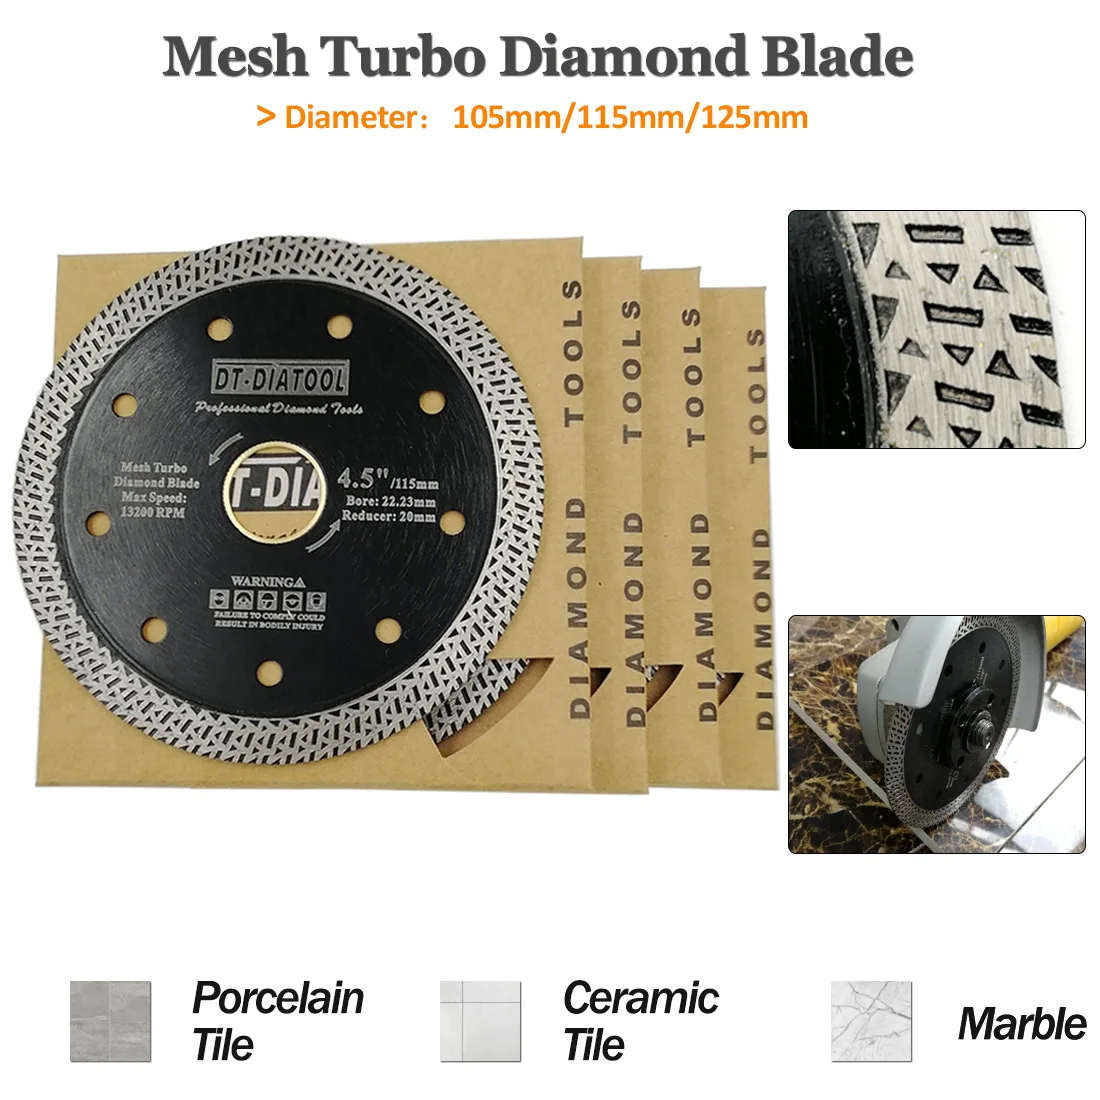 DT-DIATOOL 2pcs Diamond Superthin Saw Blades X Mesh Turbo Rim Segment Cutting Disc 105/115/125 mm  for Tile Ceramic Marble Blade dt diatool diameter 180mm electroplated convex reinforced diamond cutting disc for tile